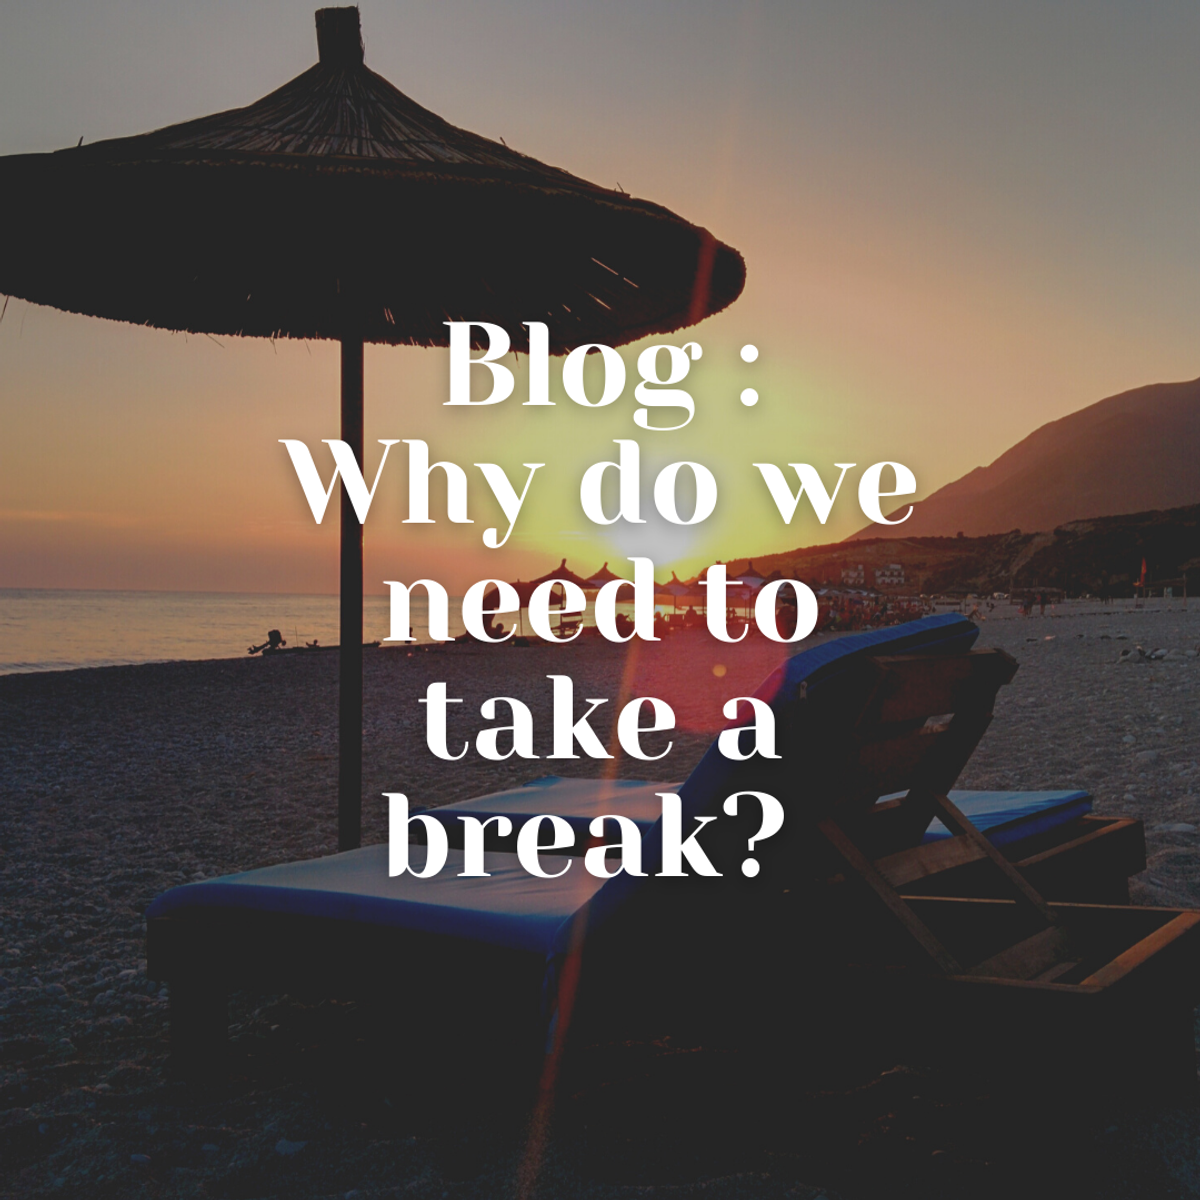 Why do we need to take a break?